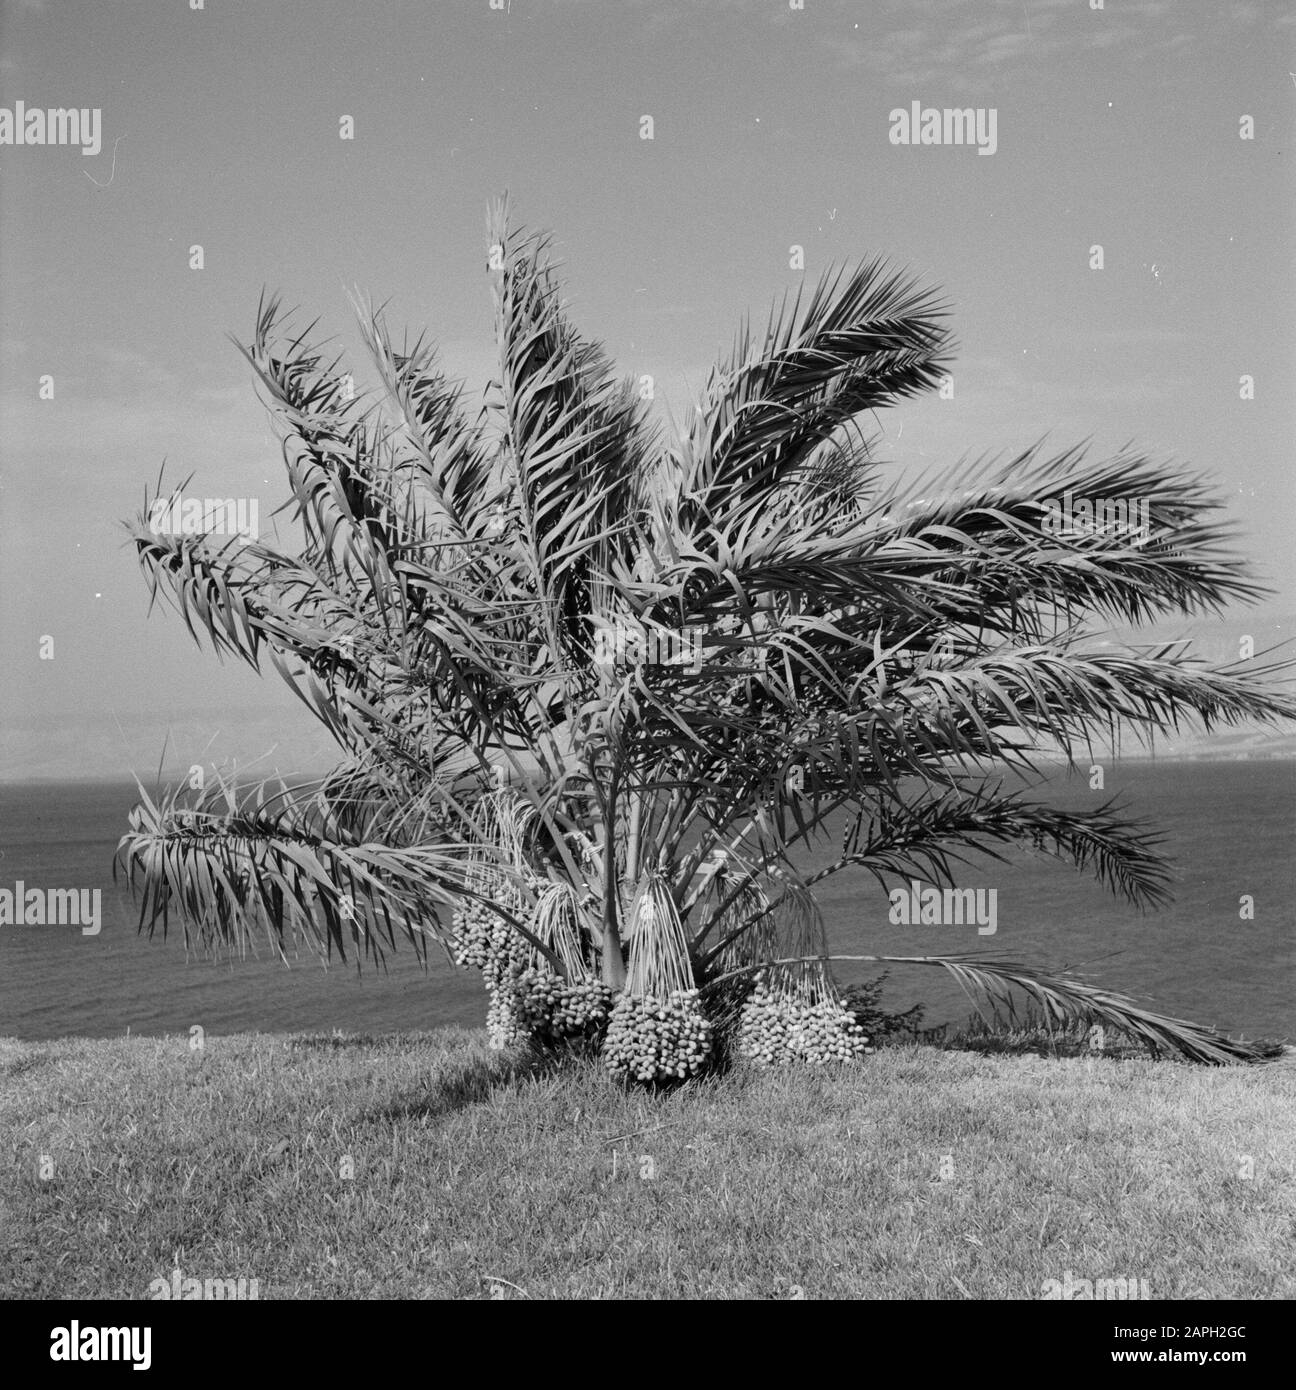 Date palm full of dates Date January 1, 1964 Location Israel Keywords